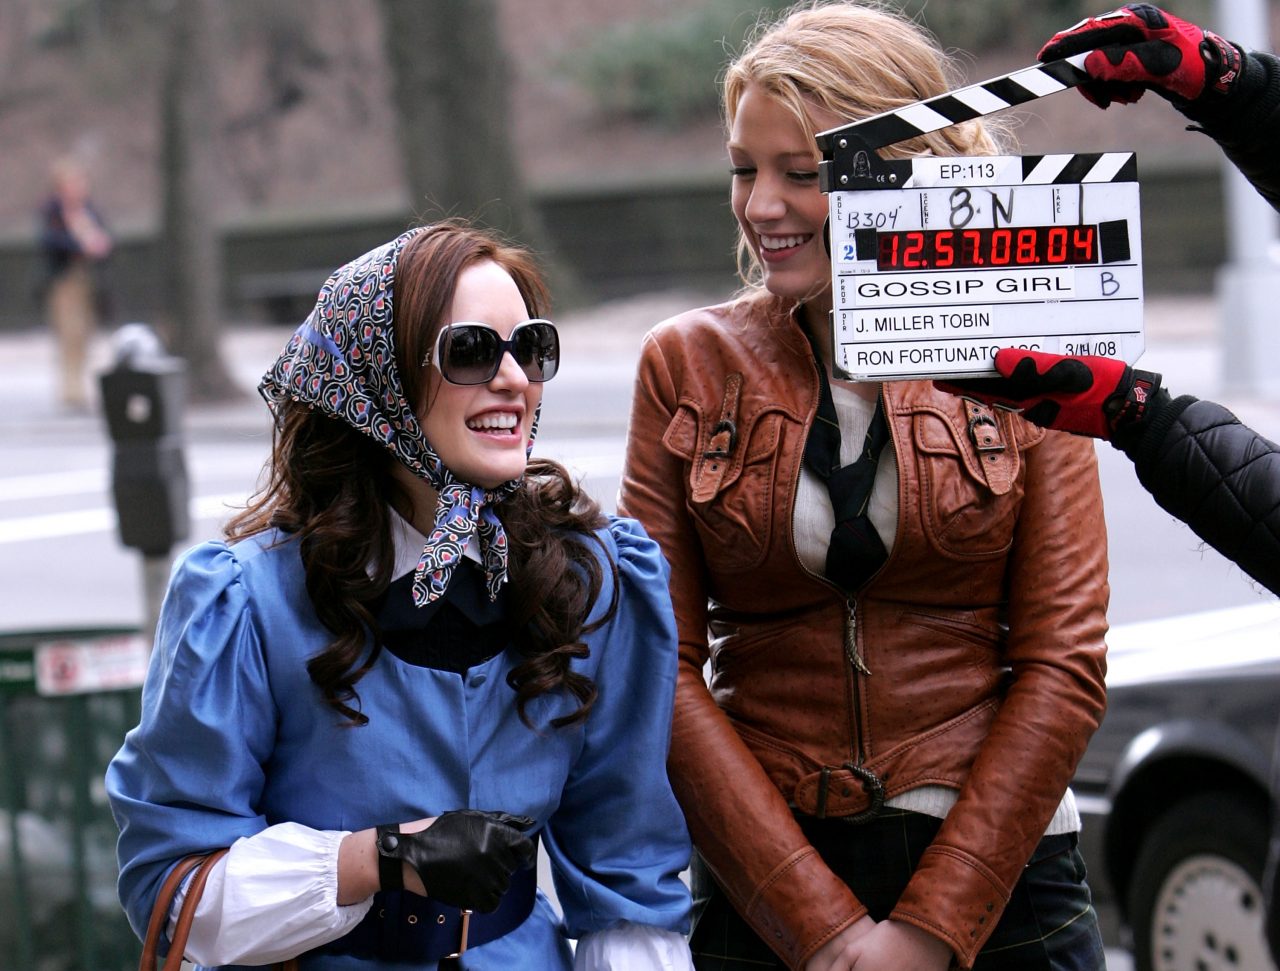 Gossip Girl season 2 - Release date, cast and everything to know